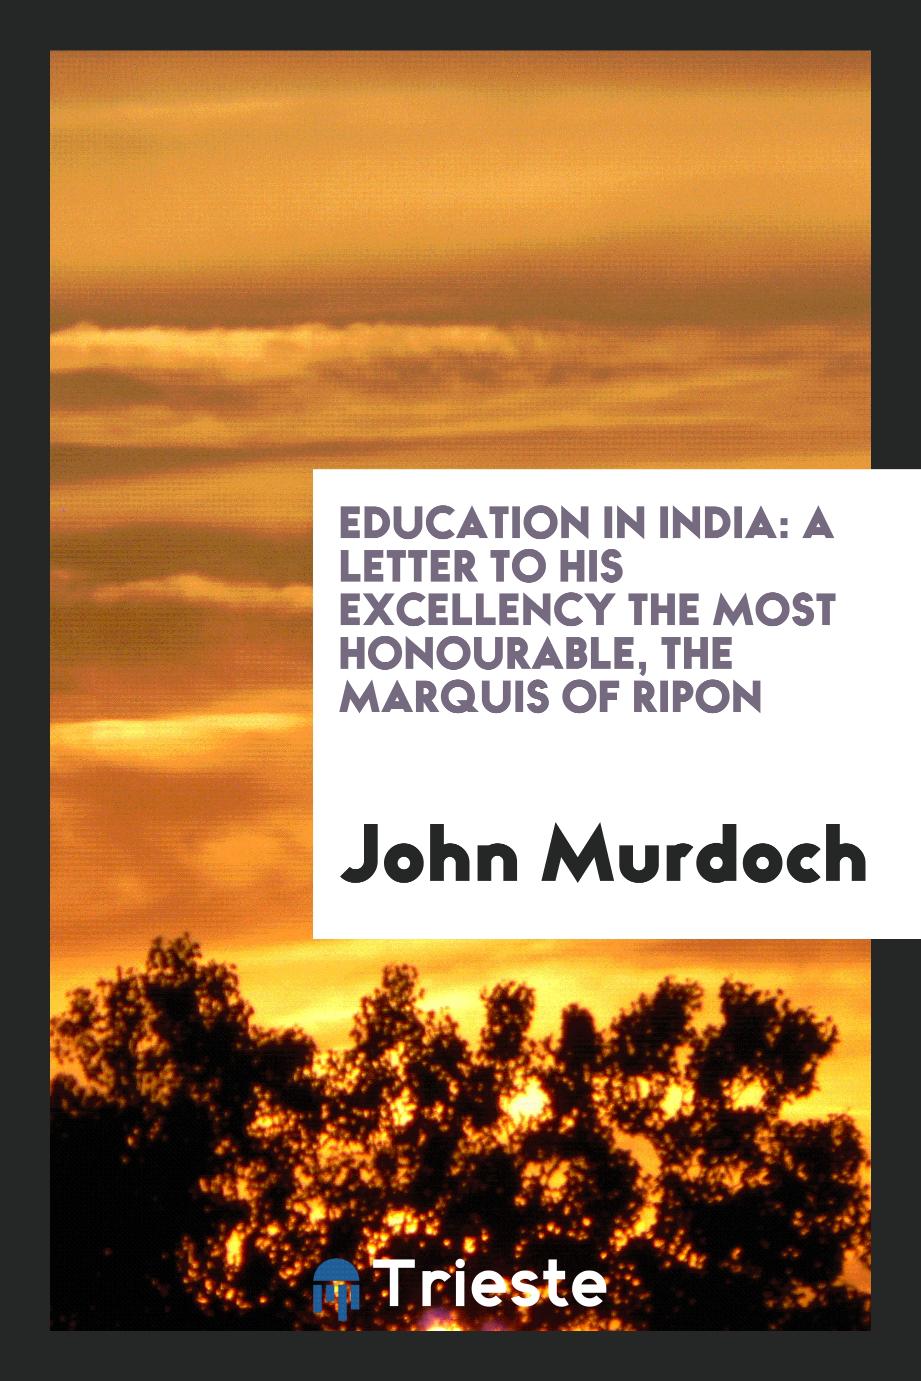 Education in India: A Letter to His Excellency the Most Honourable, the Marquis of Ripon